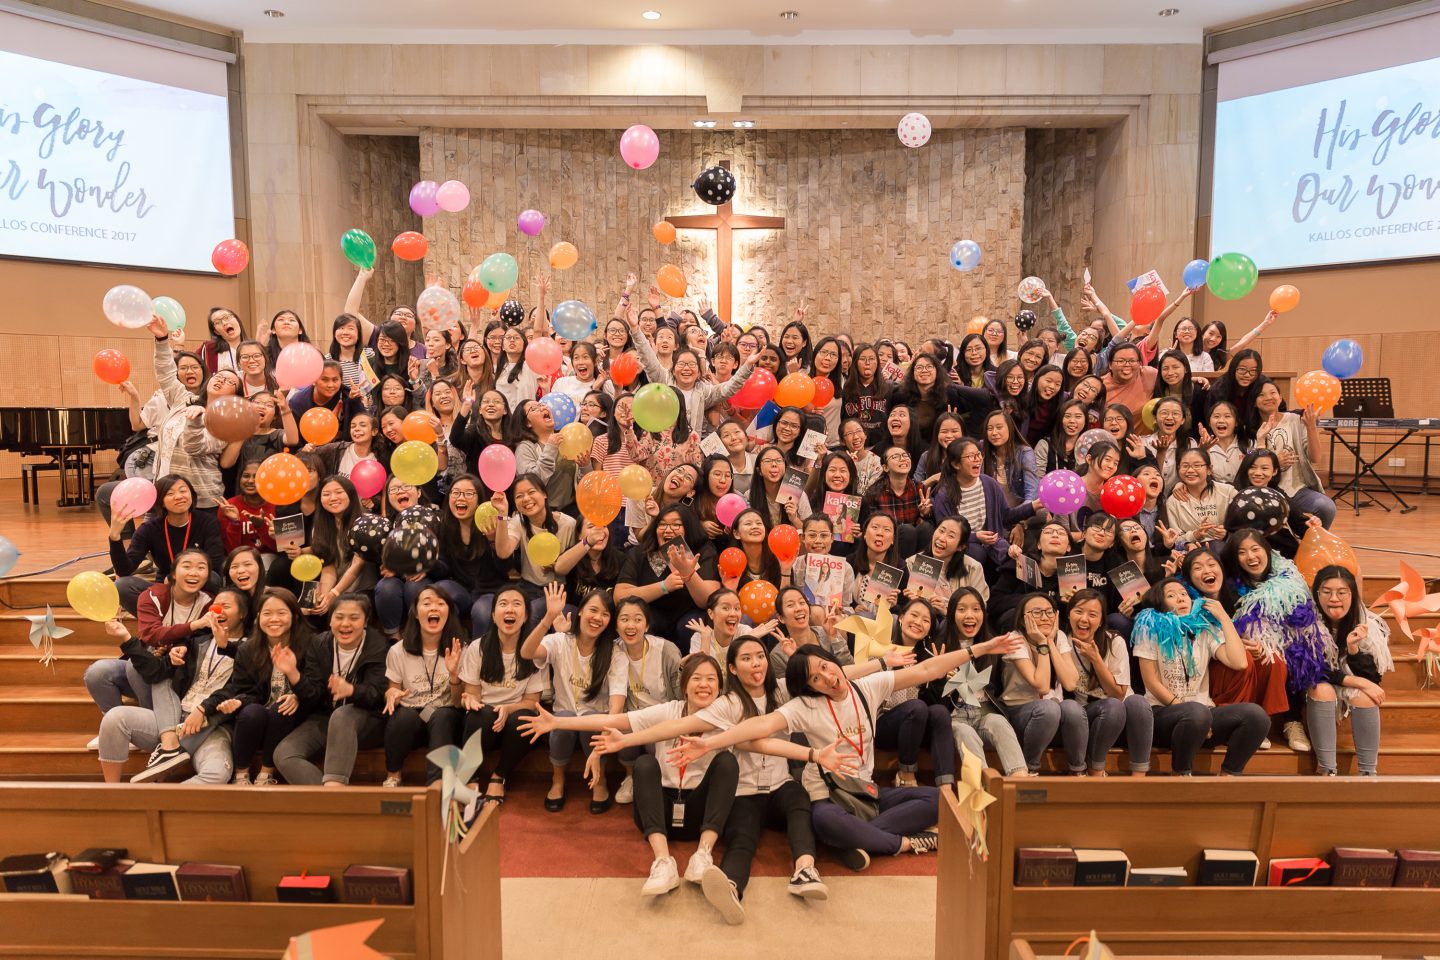 The second Kallos Conference which took place in 2017, saw teenage girls from different churches coming together to seek God.